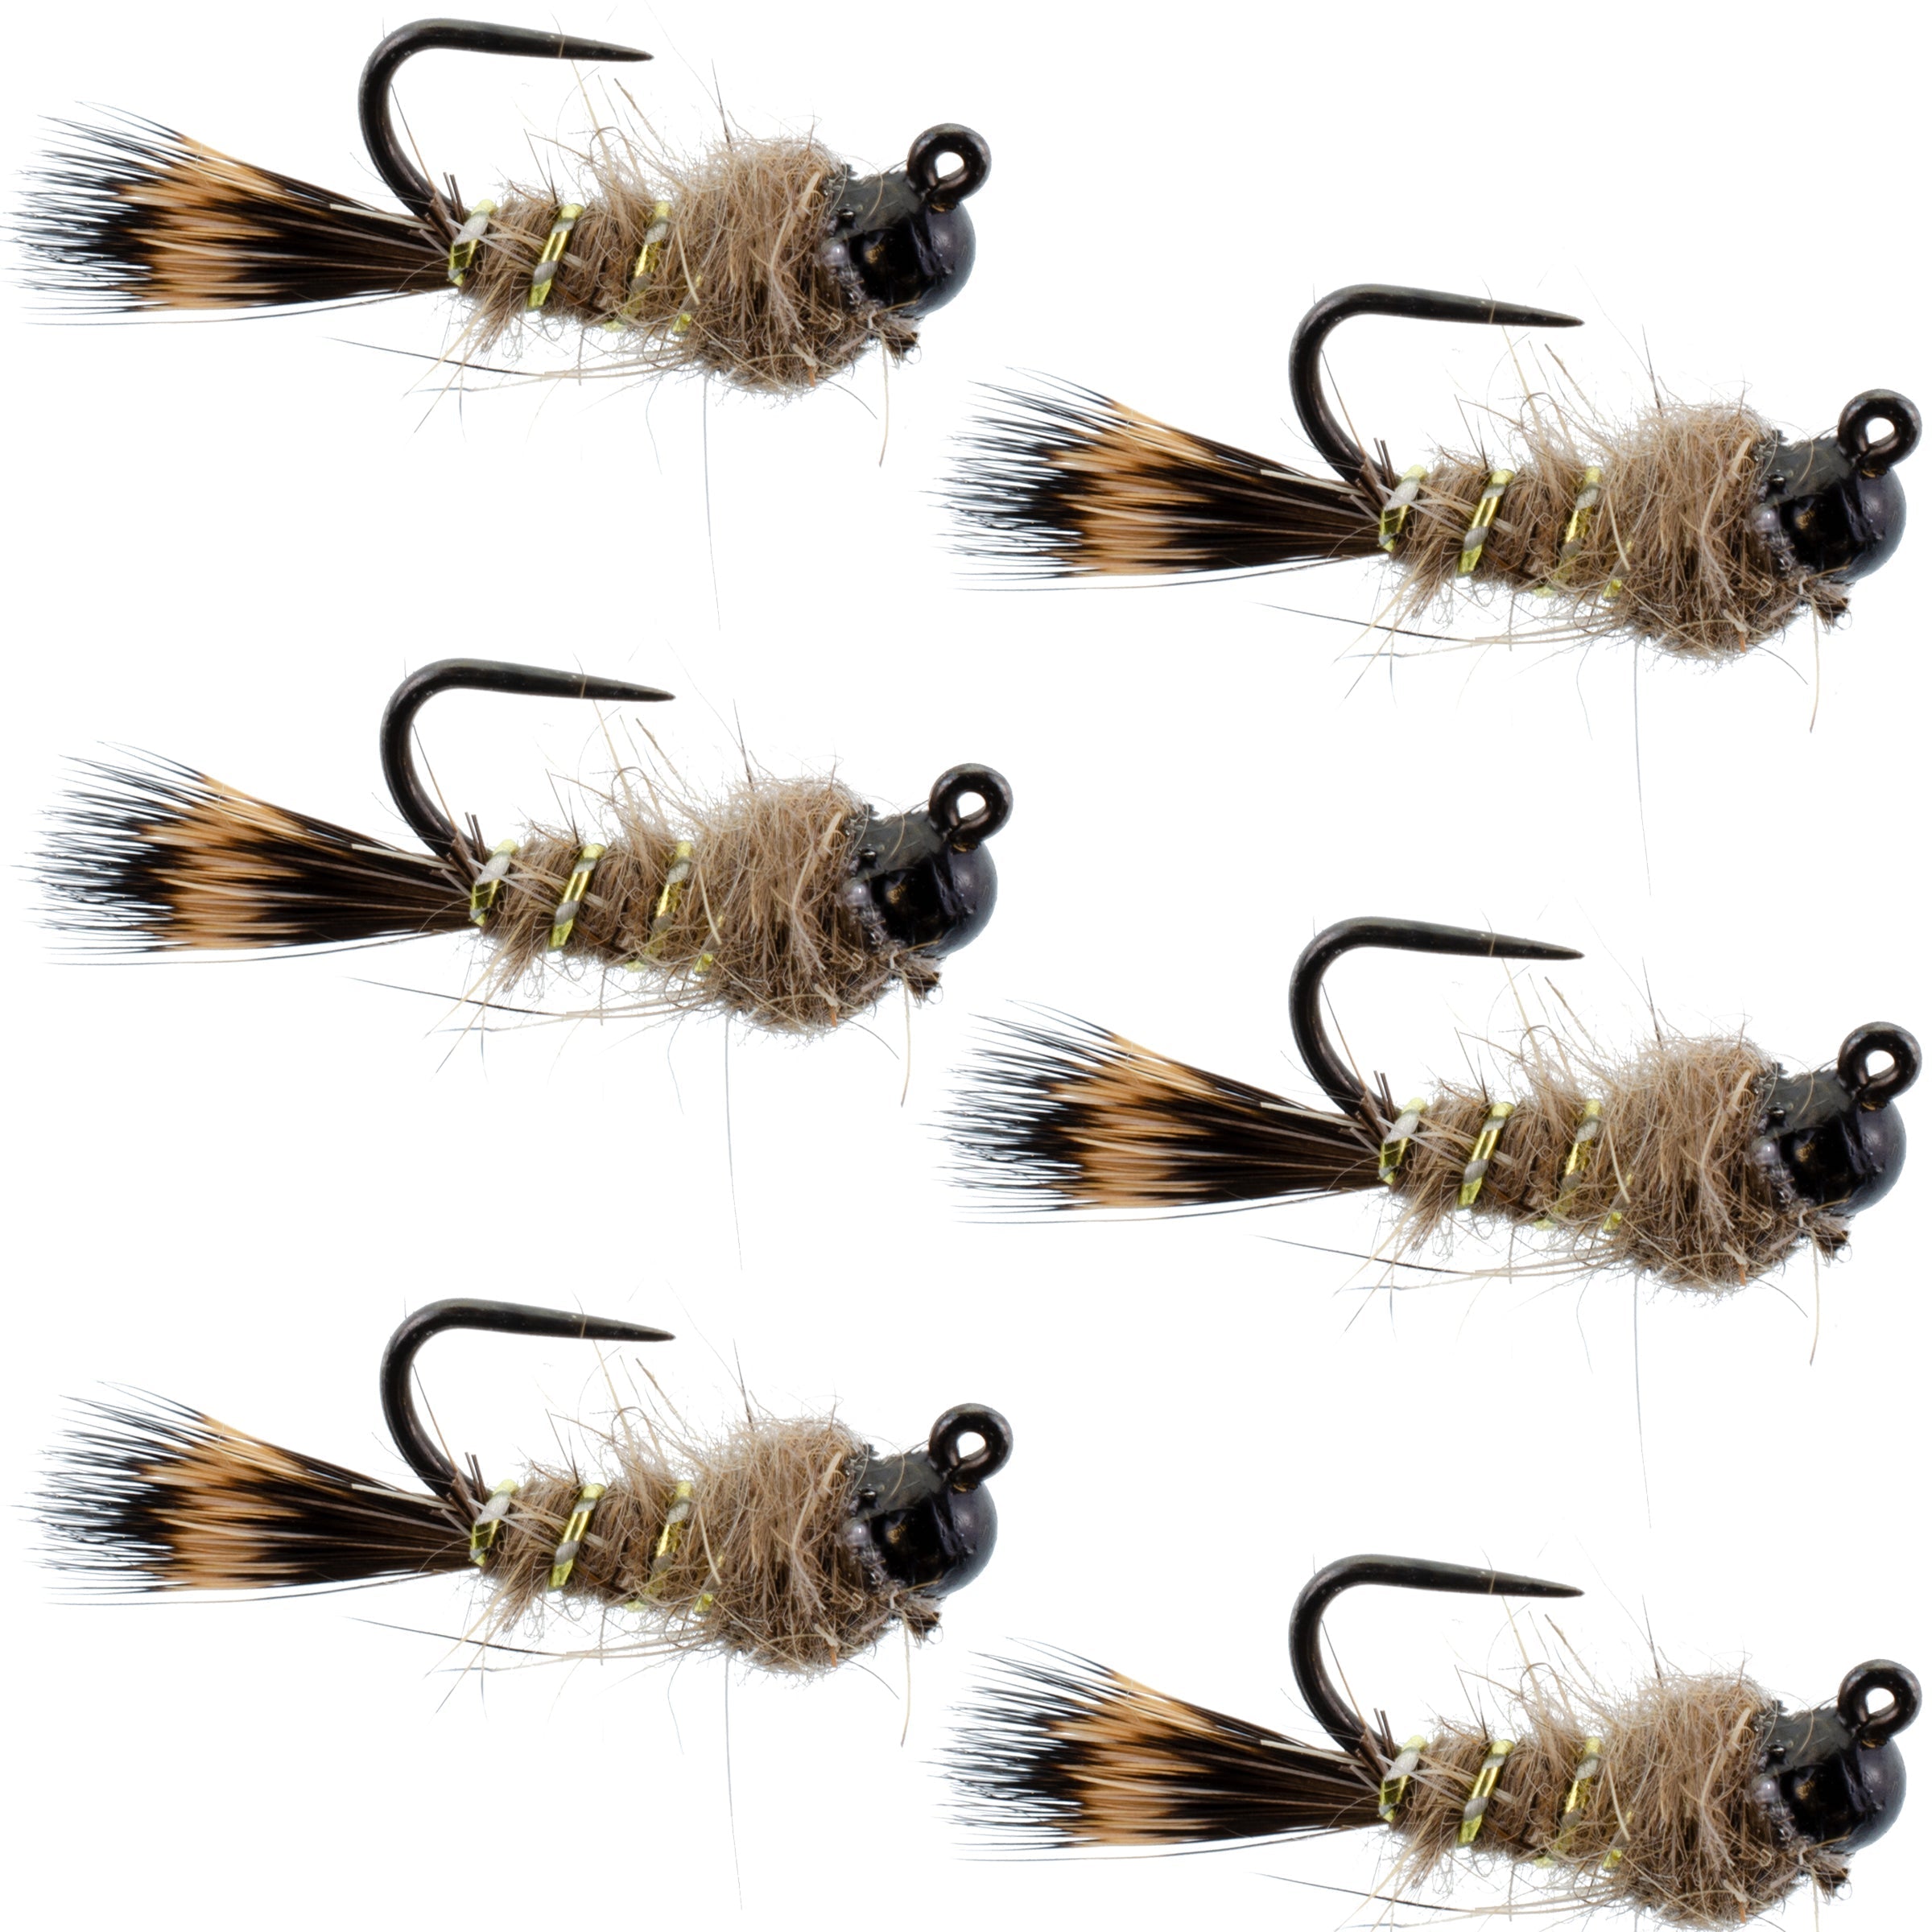 Black Tungsten Bead Tactical Hares Ear Czech Nymph Euro Nymphing Fly - 6 Flies Size 18